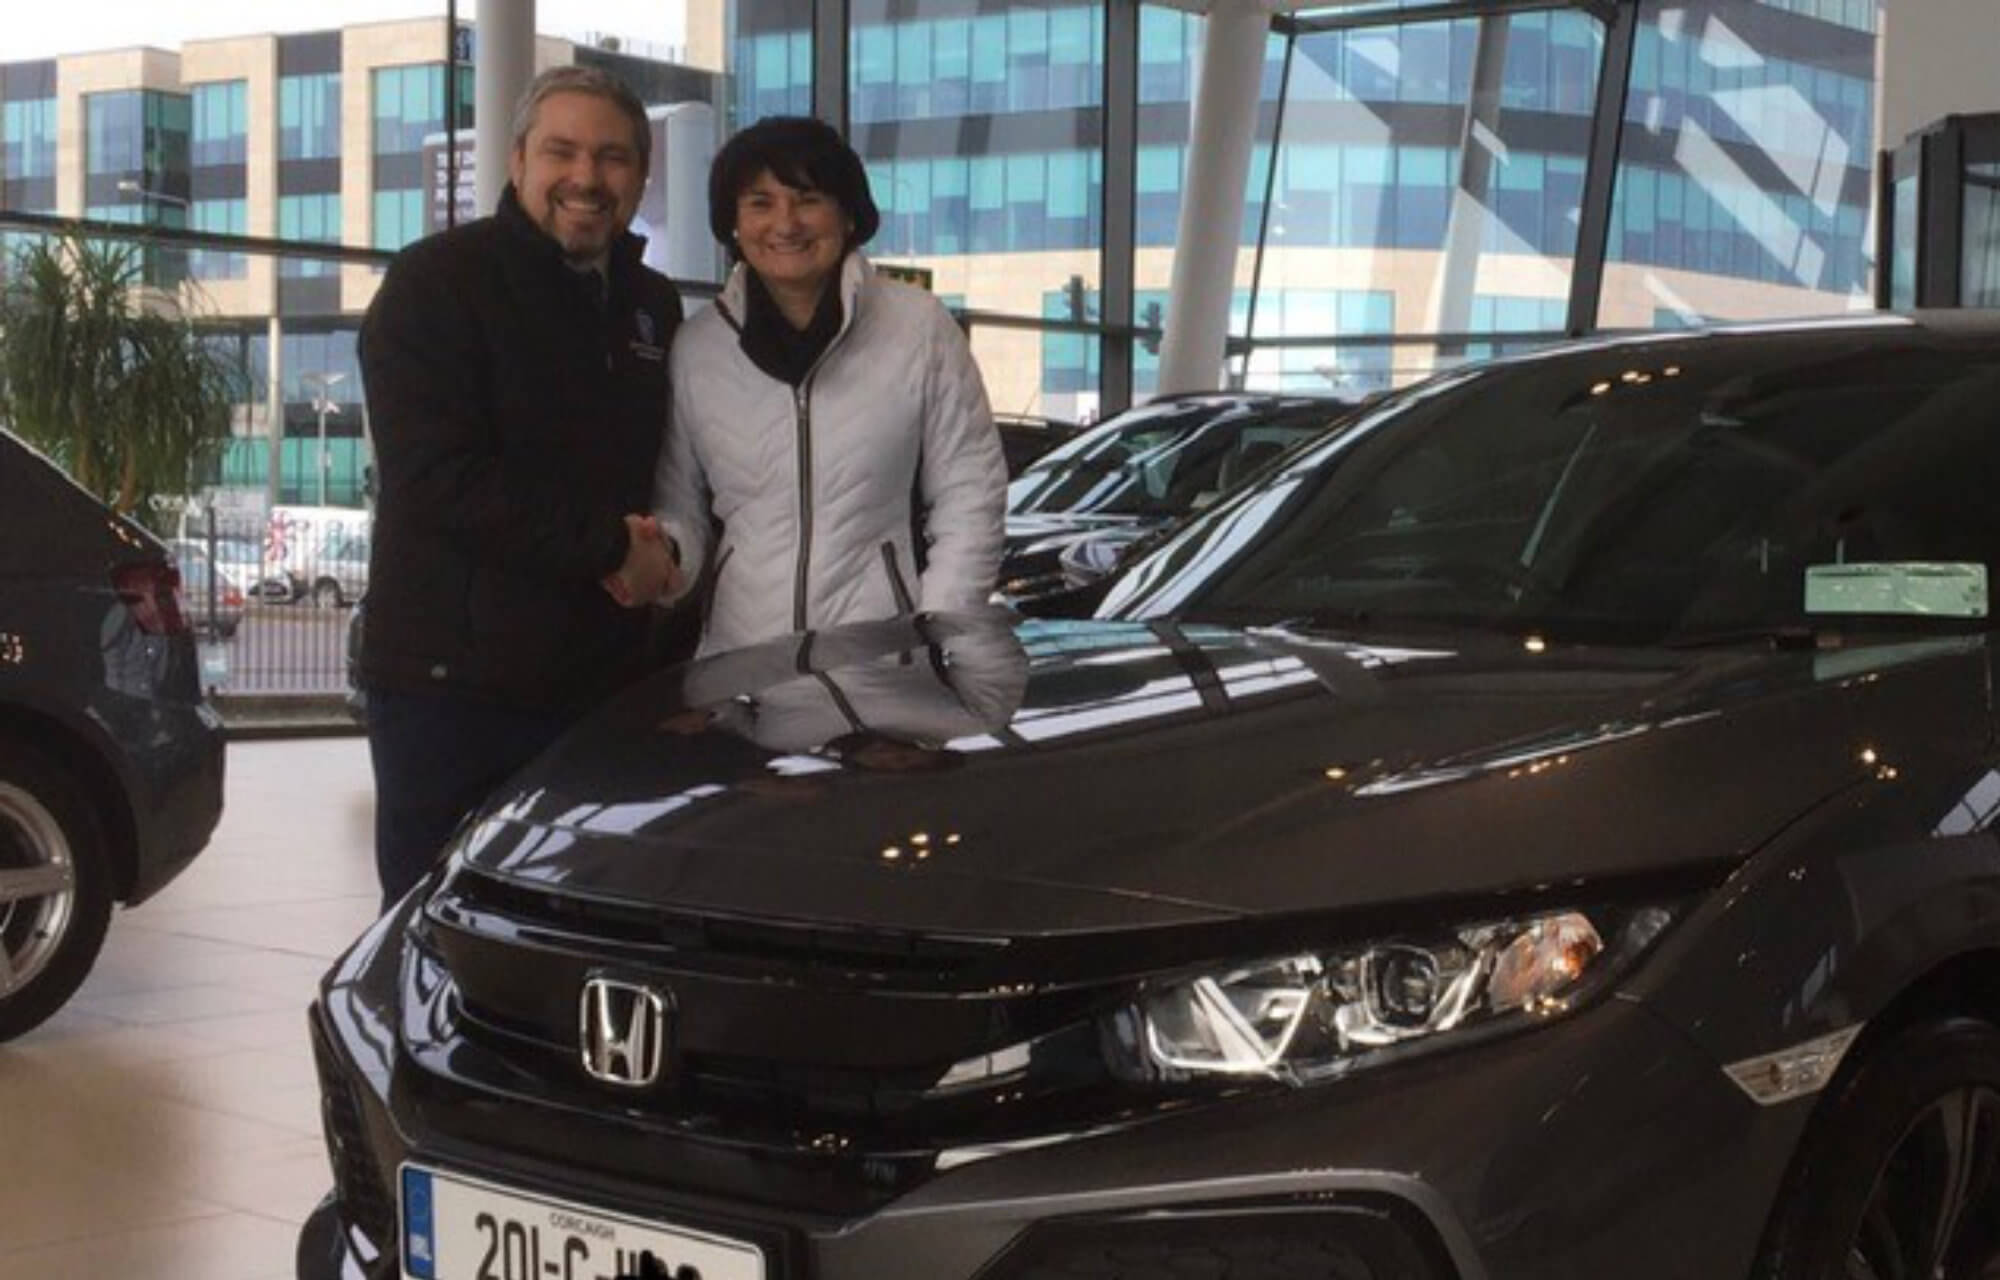 Helen collecting her new Civic